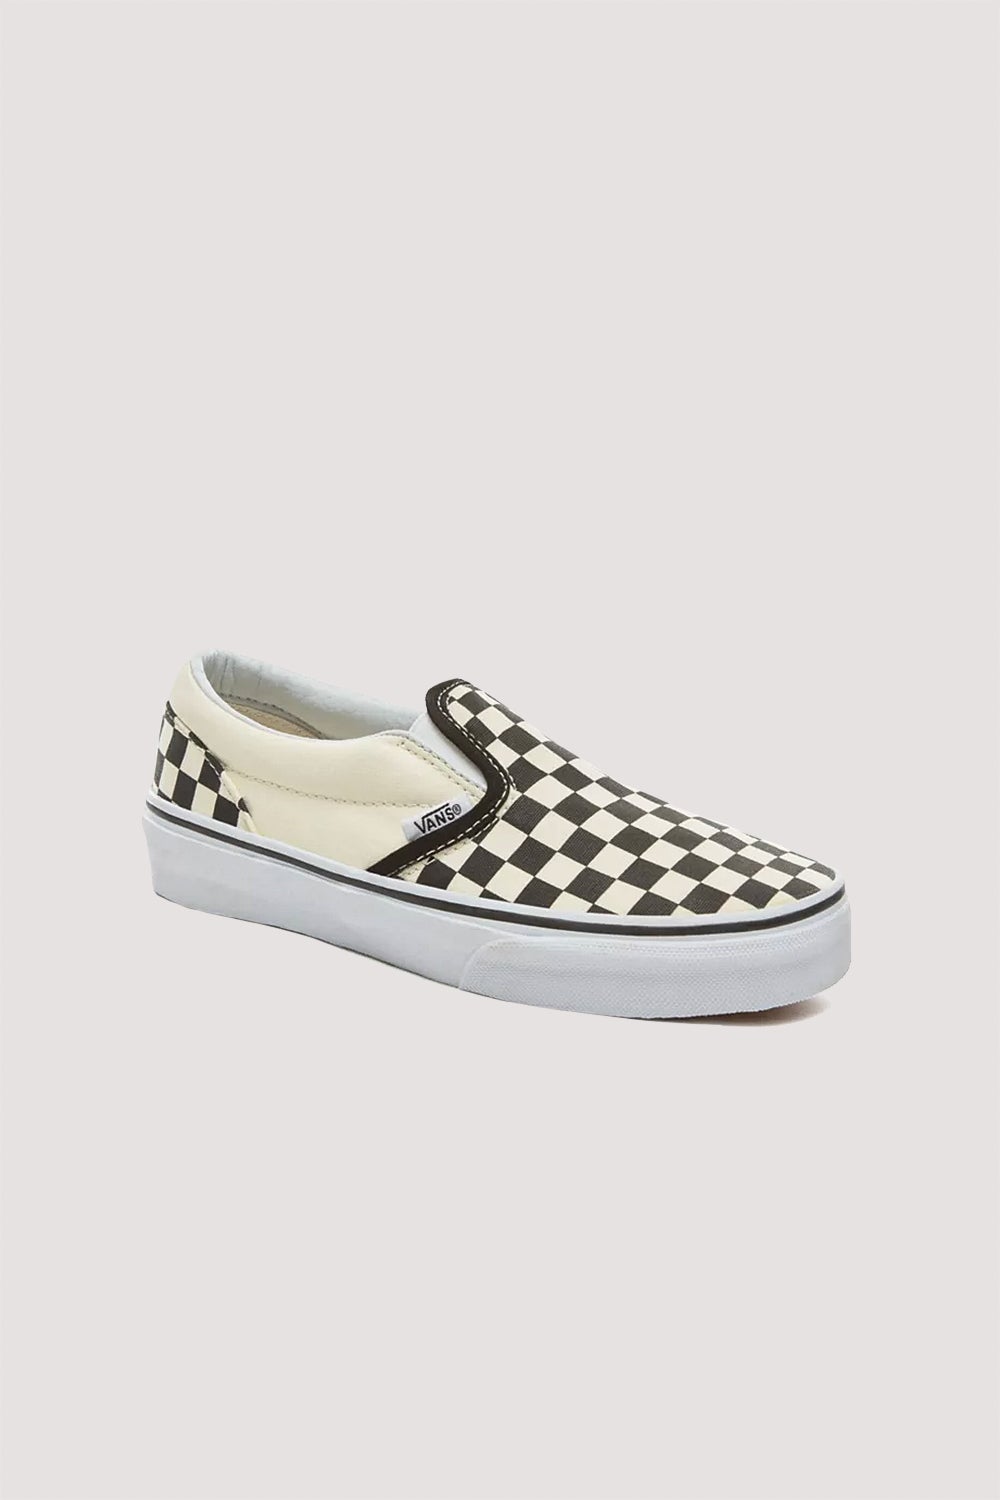 Youth Classic Slip On Checkerboard Shoe - North Beach